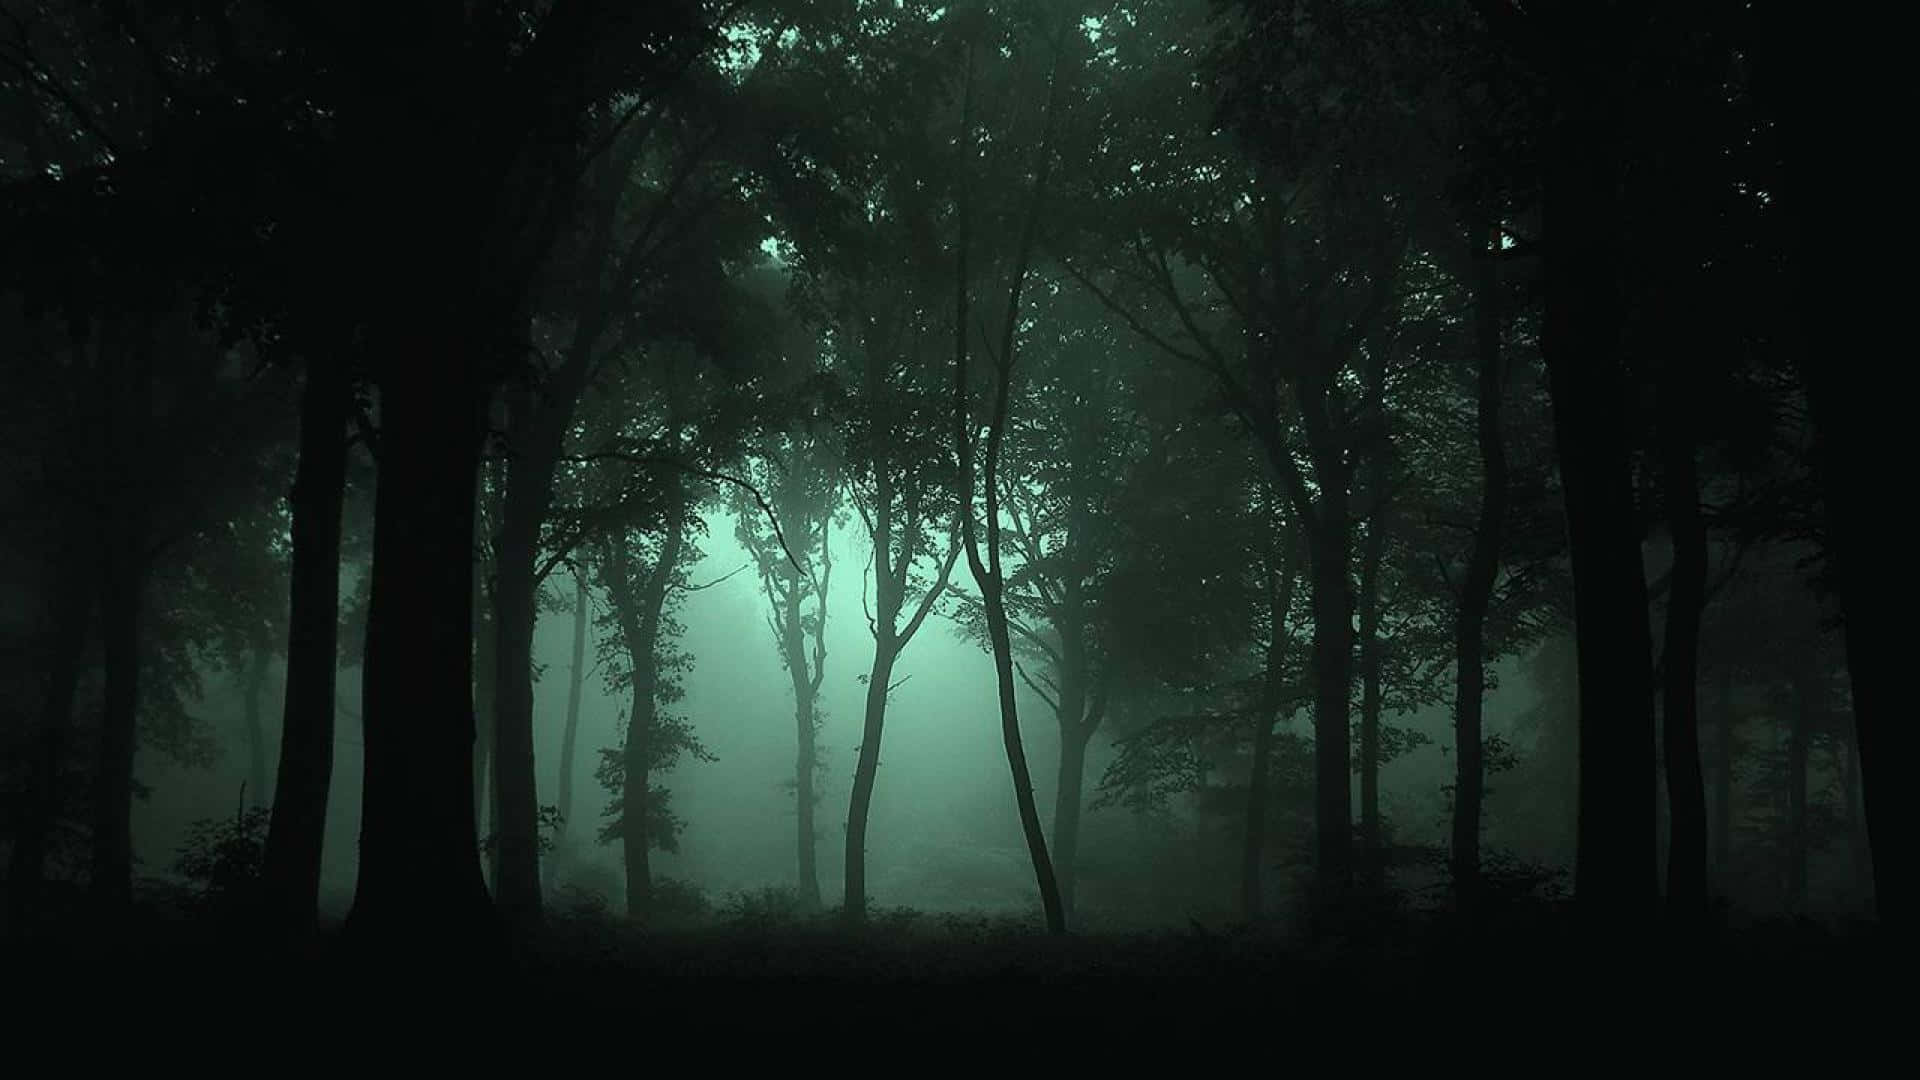 A lush green forest with dark shadows in the trees. Wallpaper